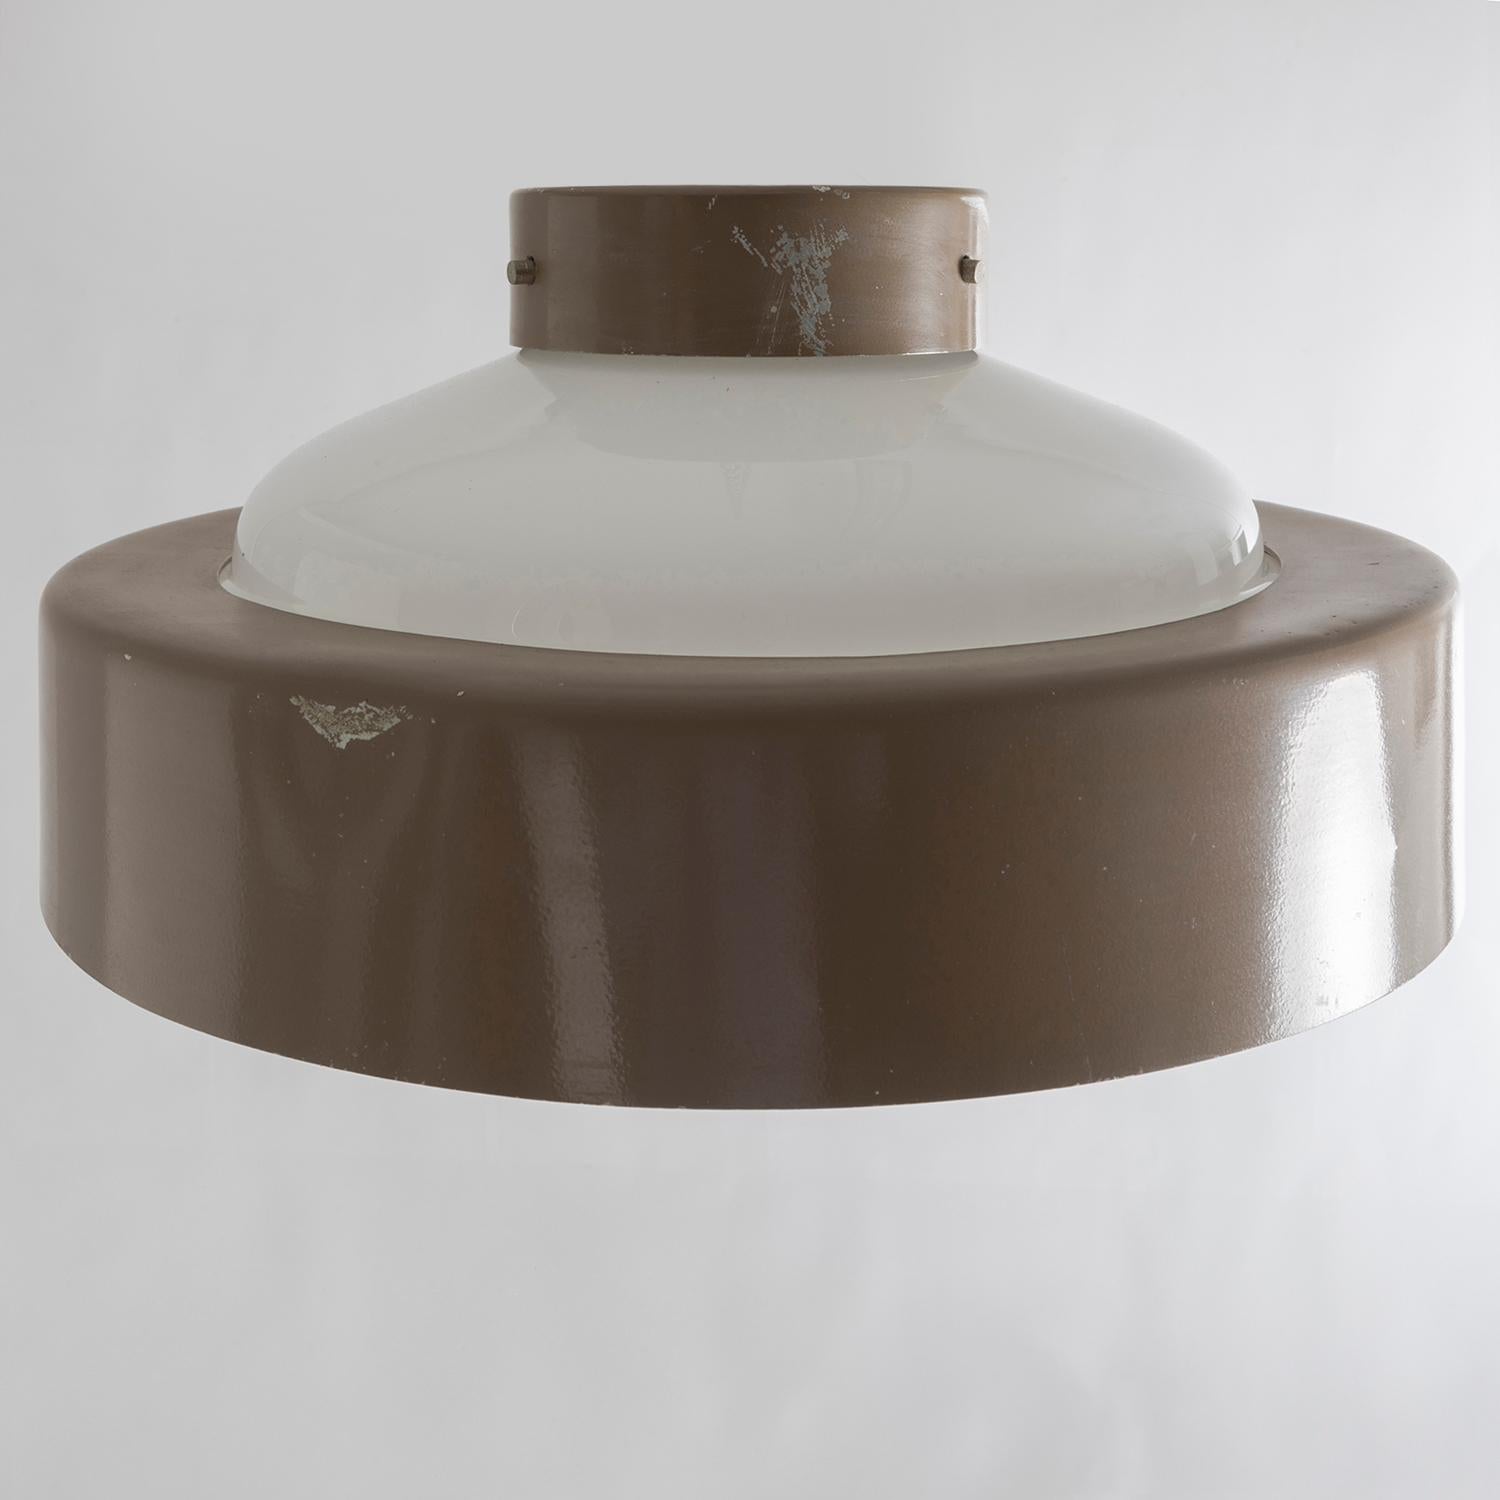 Ceiling light fixture model 3053 designed by Gino Sarfatti for Arteluce, original color with minor missing and peeling in an acceptable amount to be used without repainting the entire lamp. Glass diffuser in perfect condition, original electrical